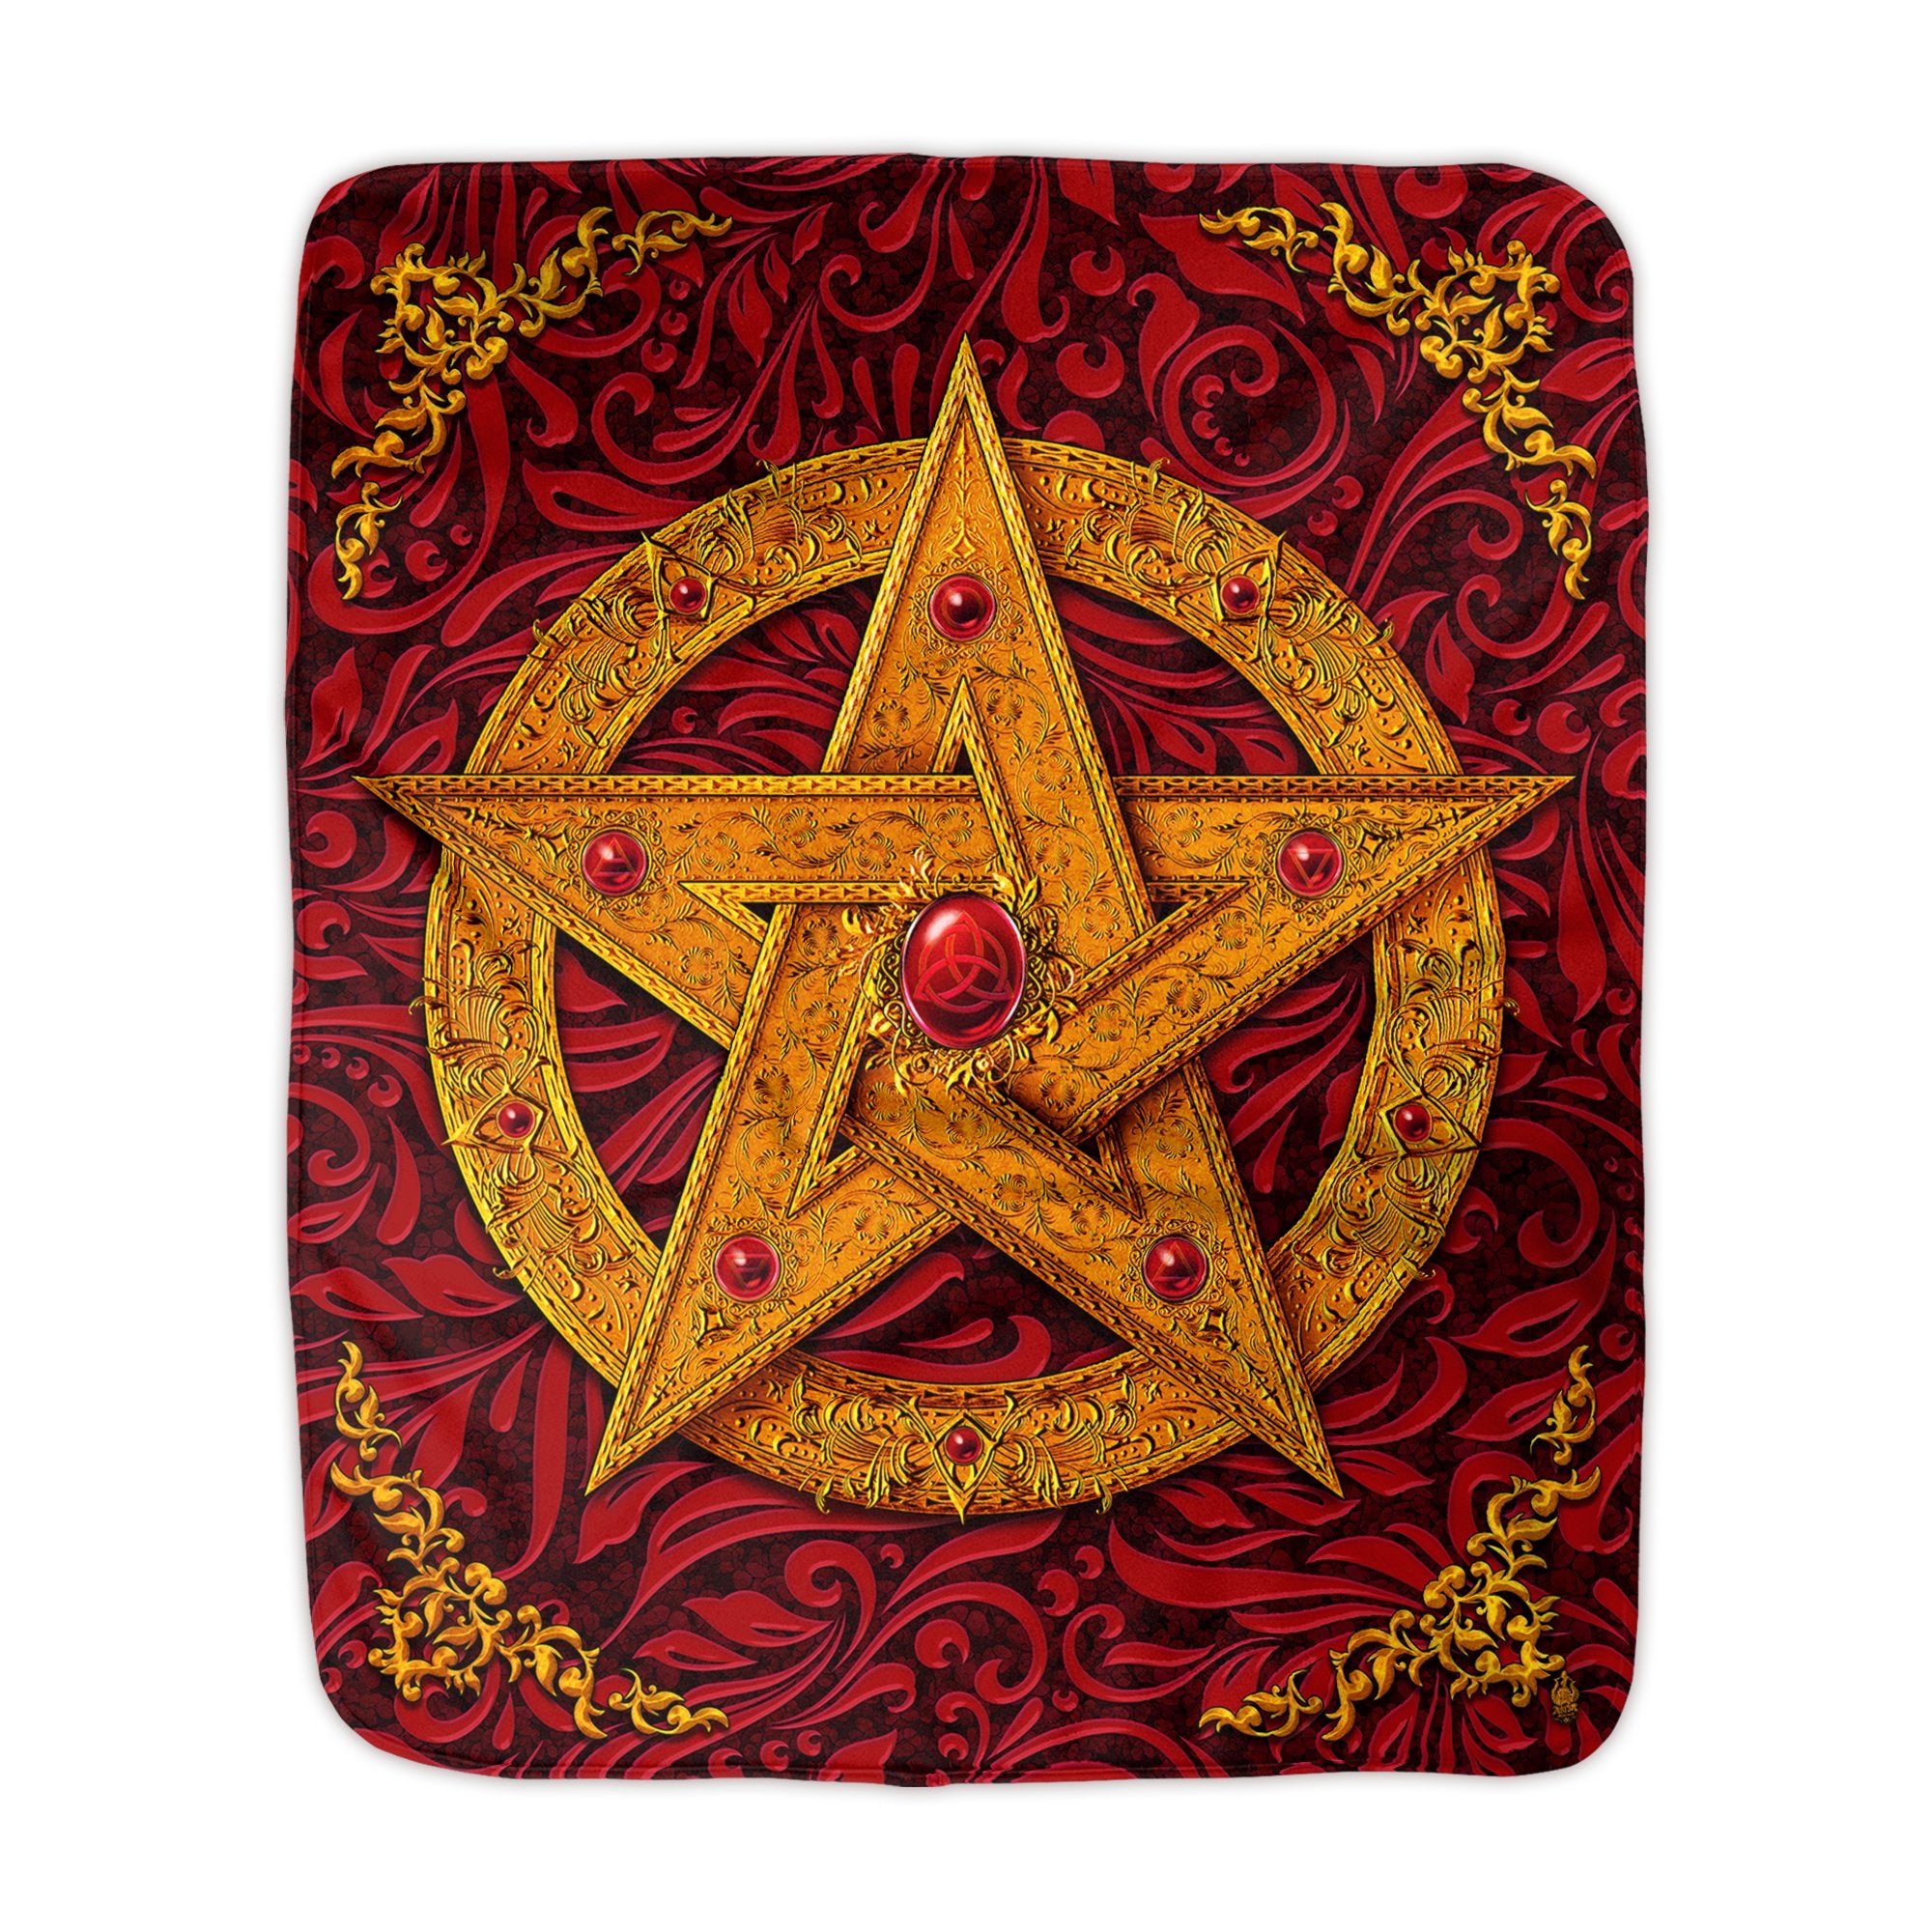 Gold Pentacle Sherpa Fleece Throw Blanket, Wiccan and Pagan Decor, Witchy Room - Blue, Purple, Green and Red, 4 Colors - Abysm Internal